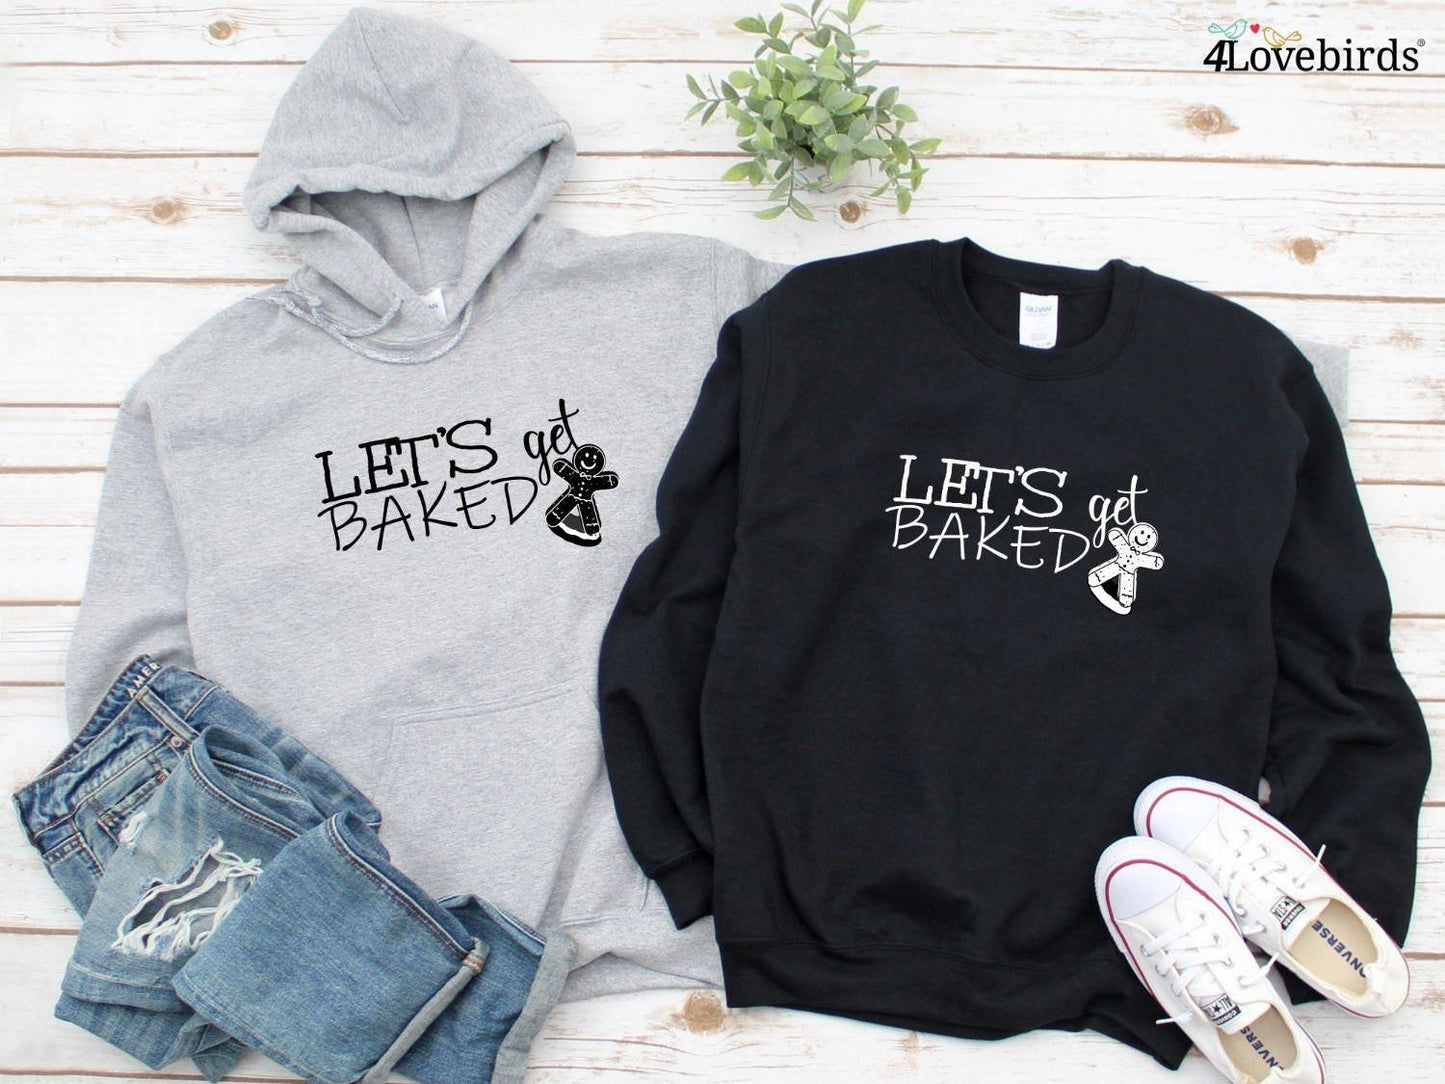 Let's get Baked Hoodie - Funny Christmas Sweatshirt - Couples Christmas Shirt for Women Men - Christmas Tee - Holiday Tee Funny TShirts - 4Lovebirds